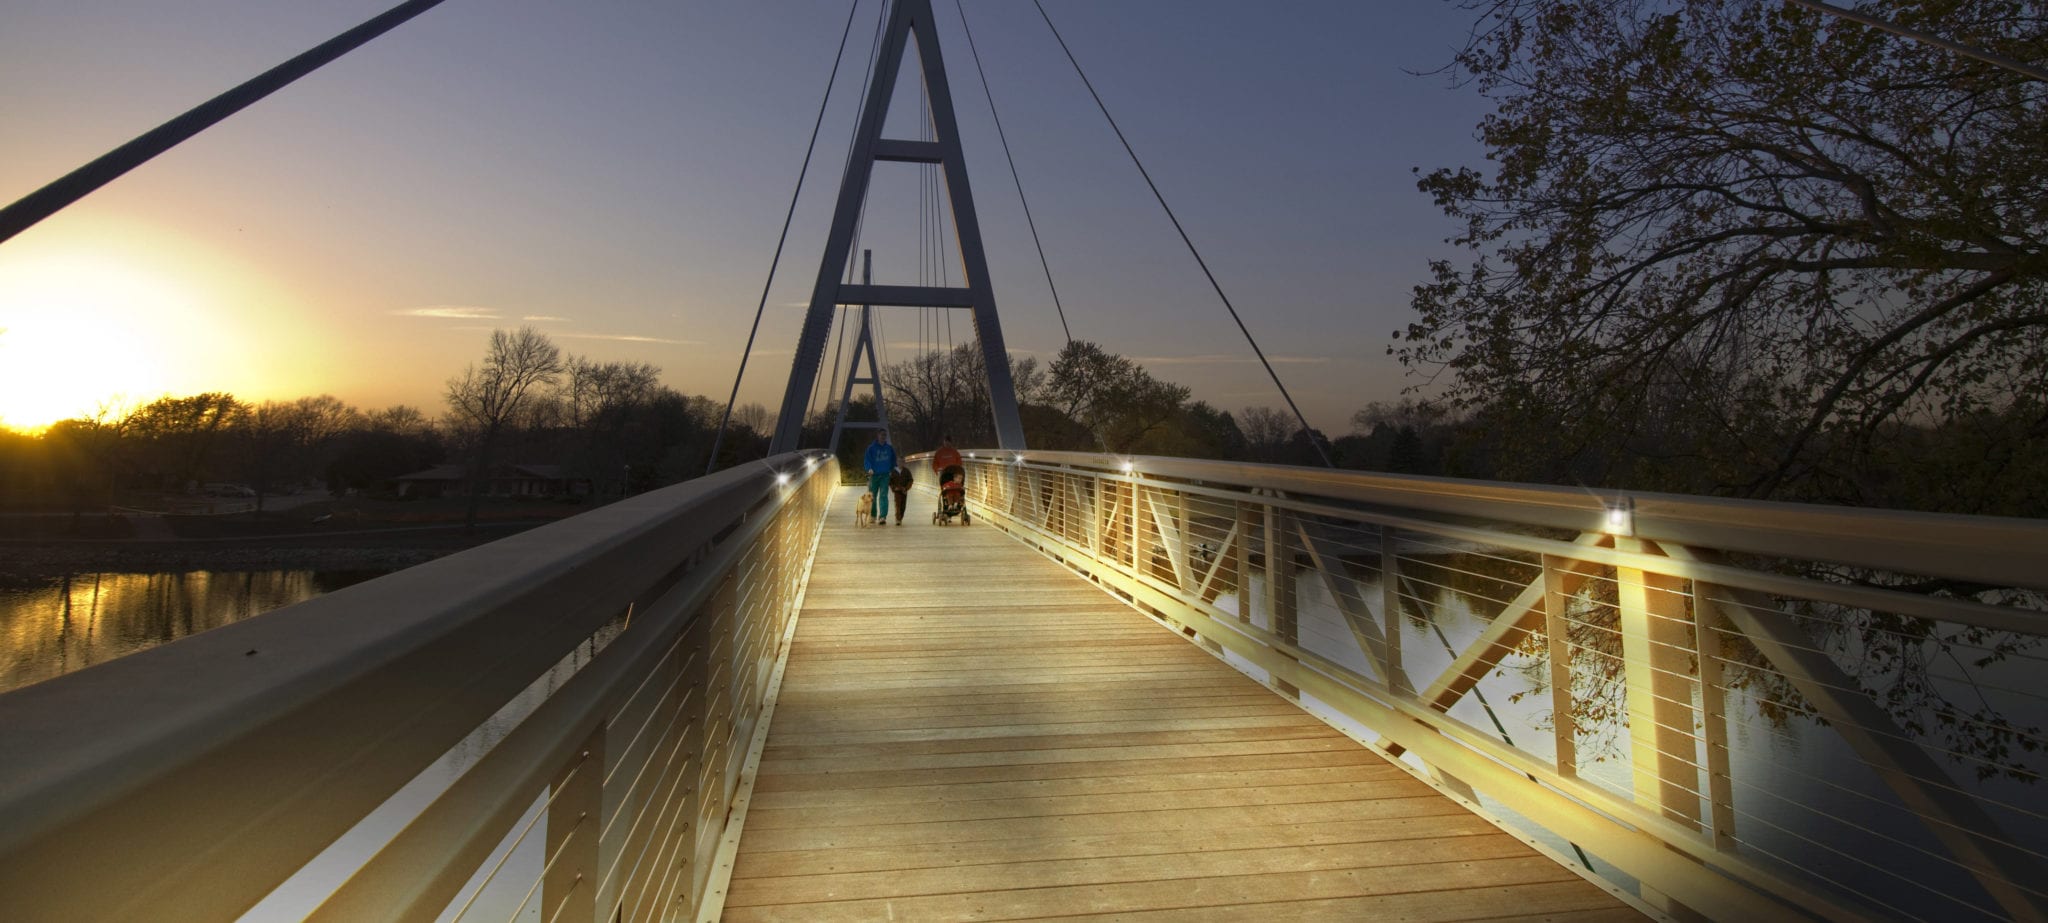 Cable-stayed pedestrian bridge design with architectural lighting